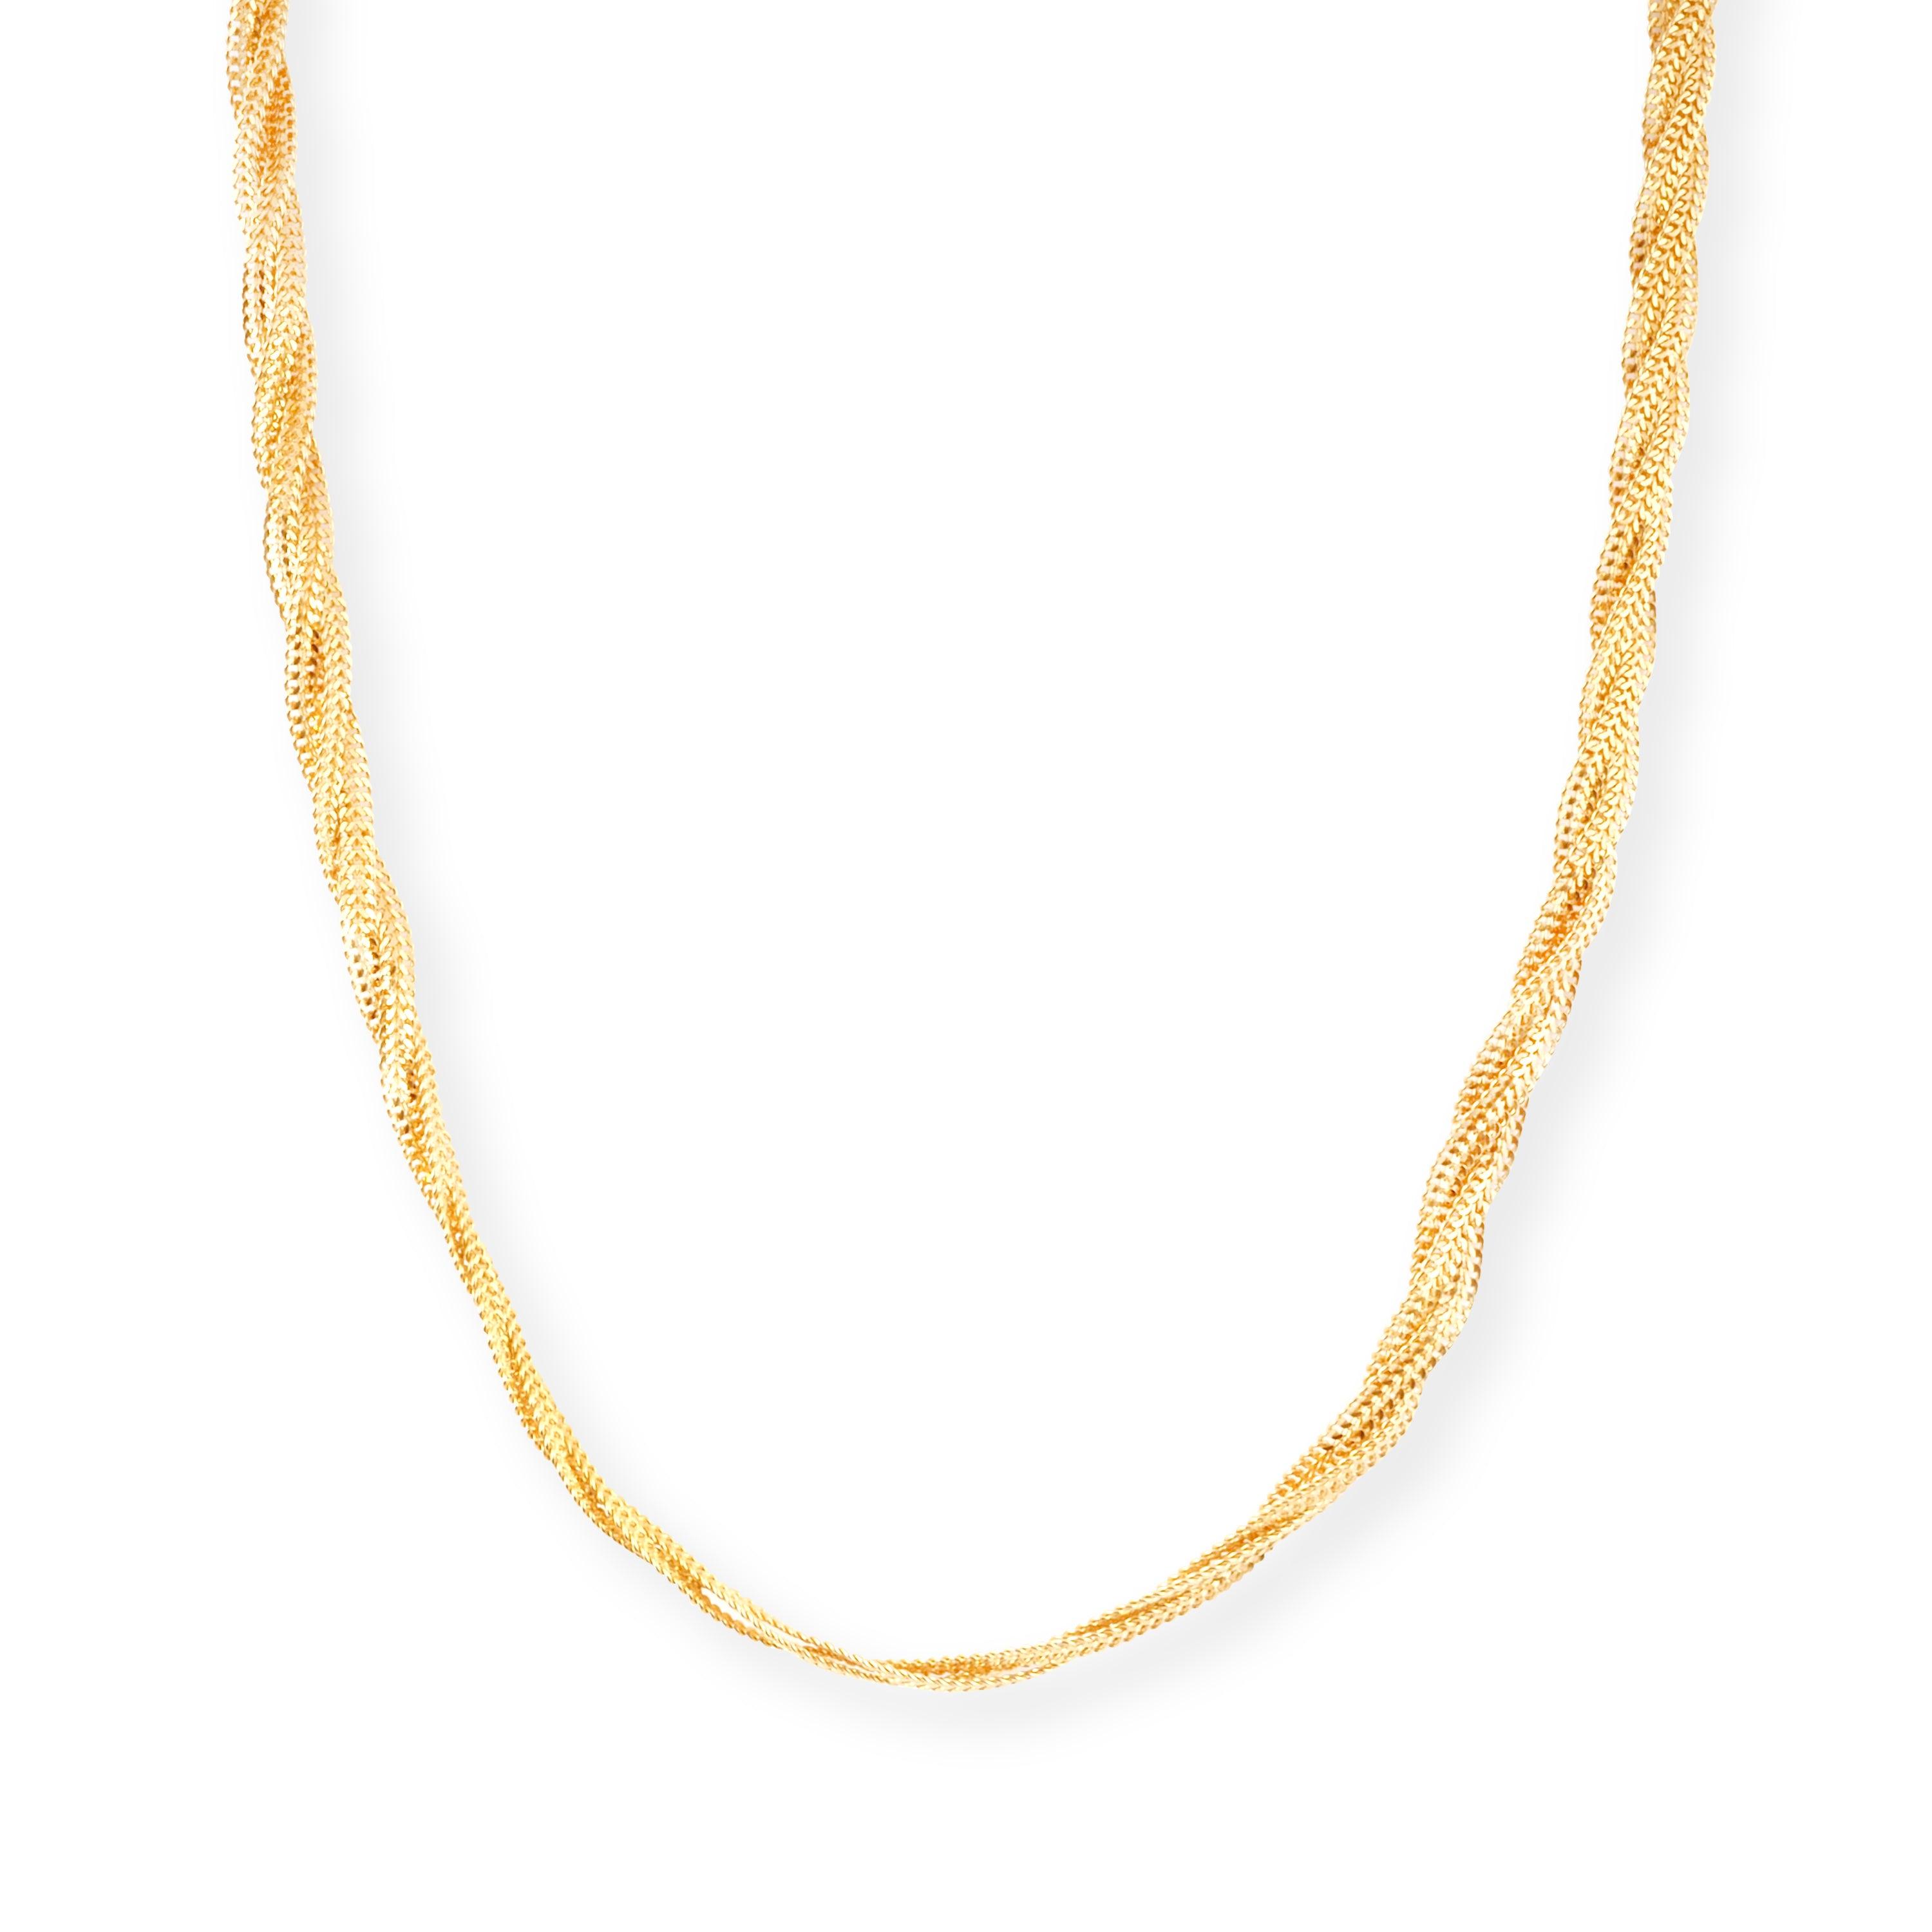 22ct Gold Fancy Ribbon Chain with Lobster Clasp C-5288 - Minar Jewellers